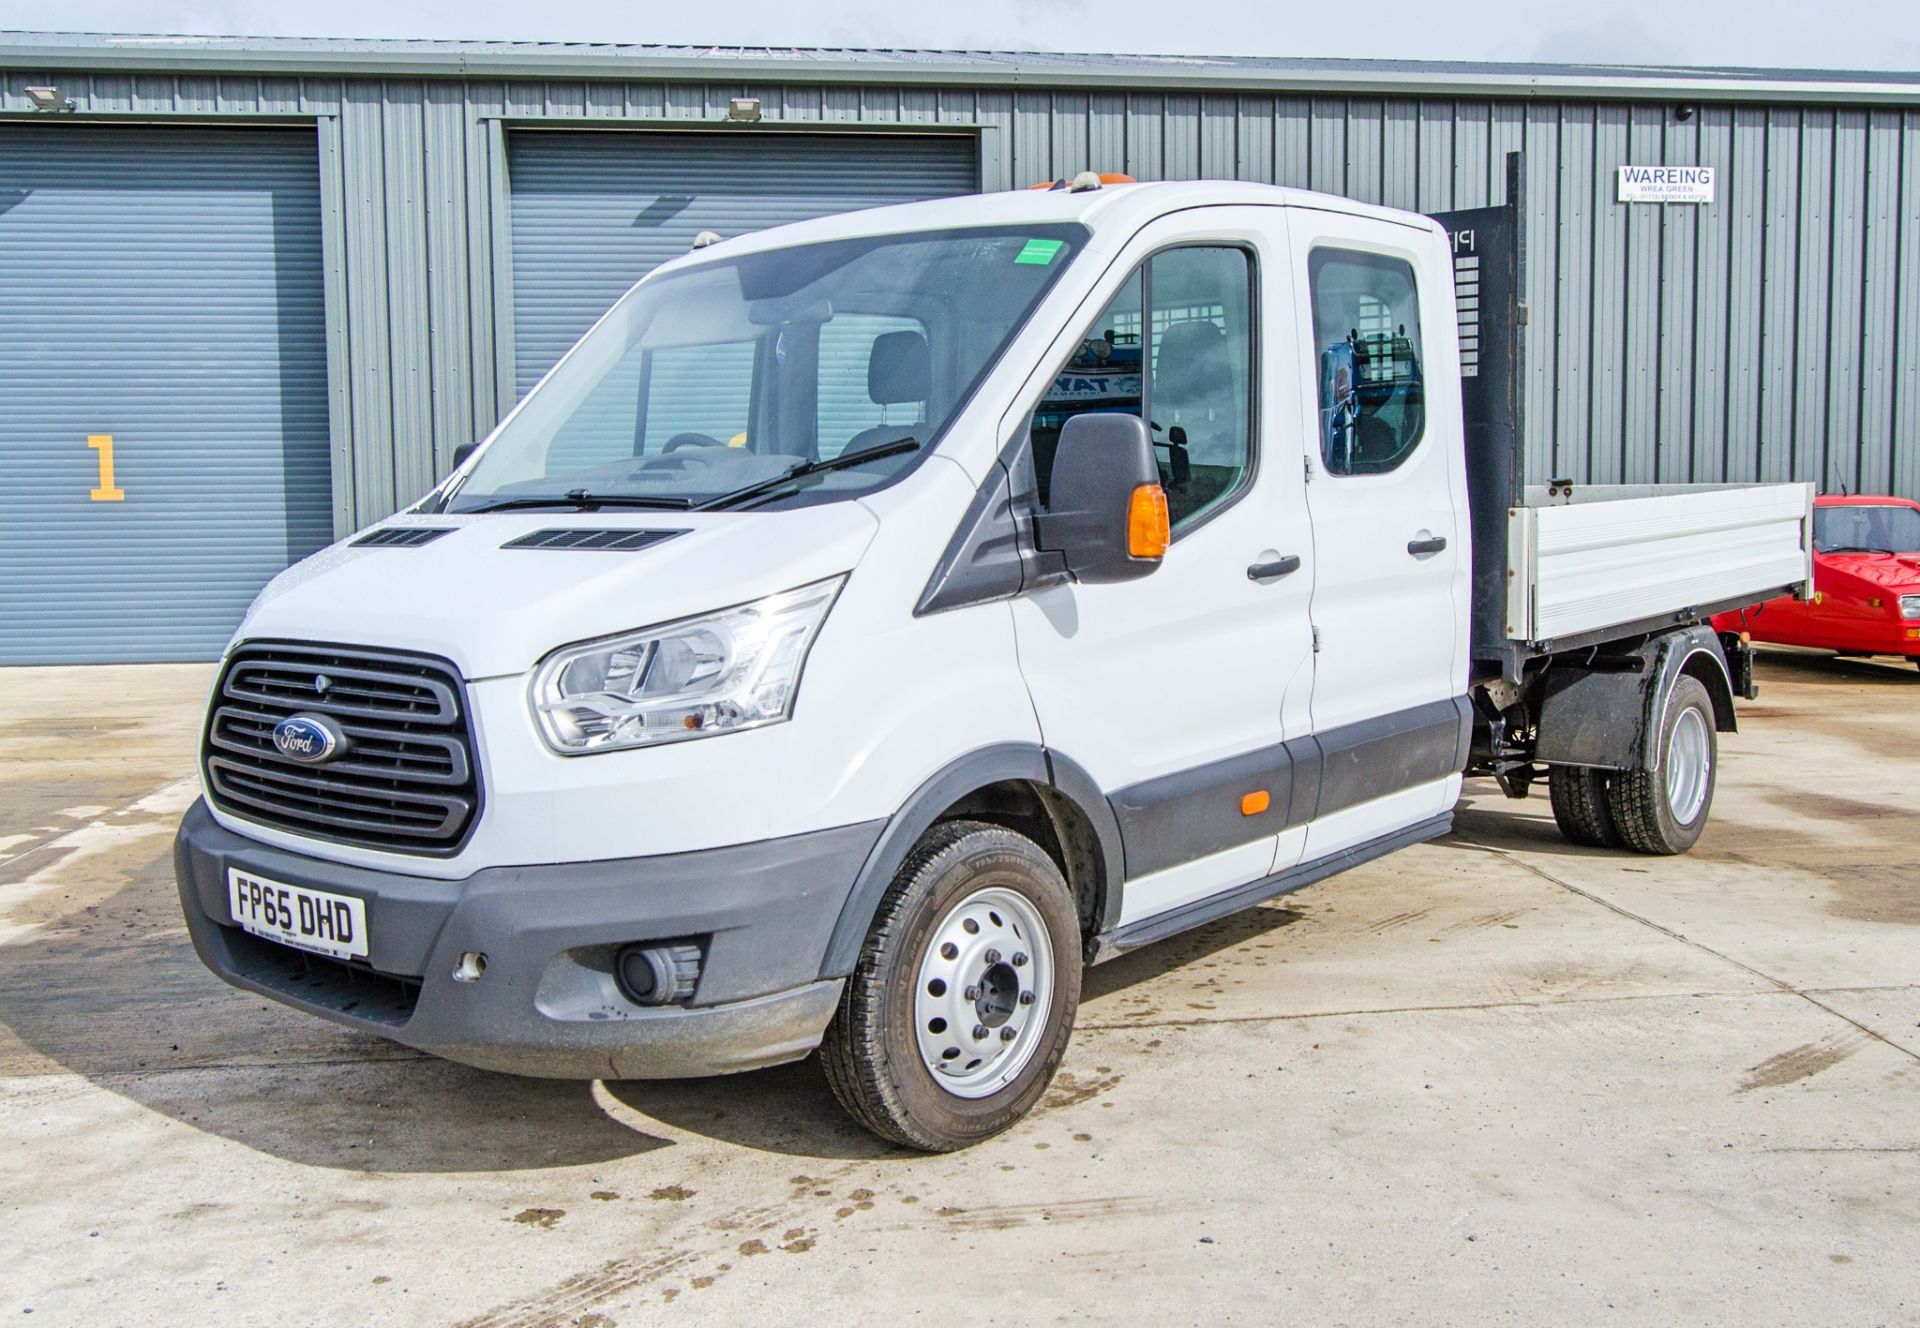 Ford Transit 350 2198cc 6 speed manual crew cab tipper  Registration Number: FP65 DHD Date of